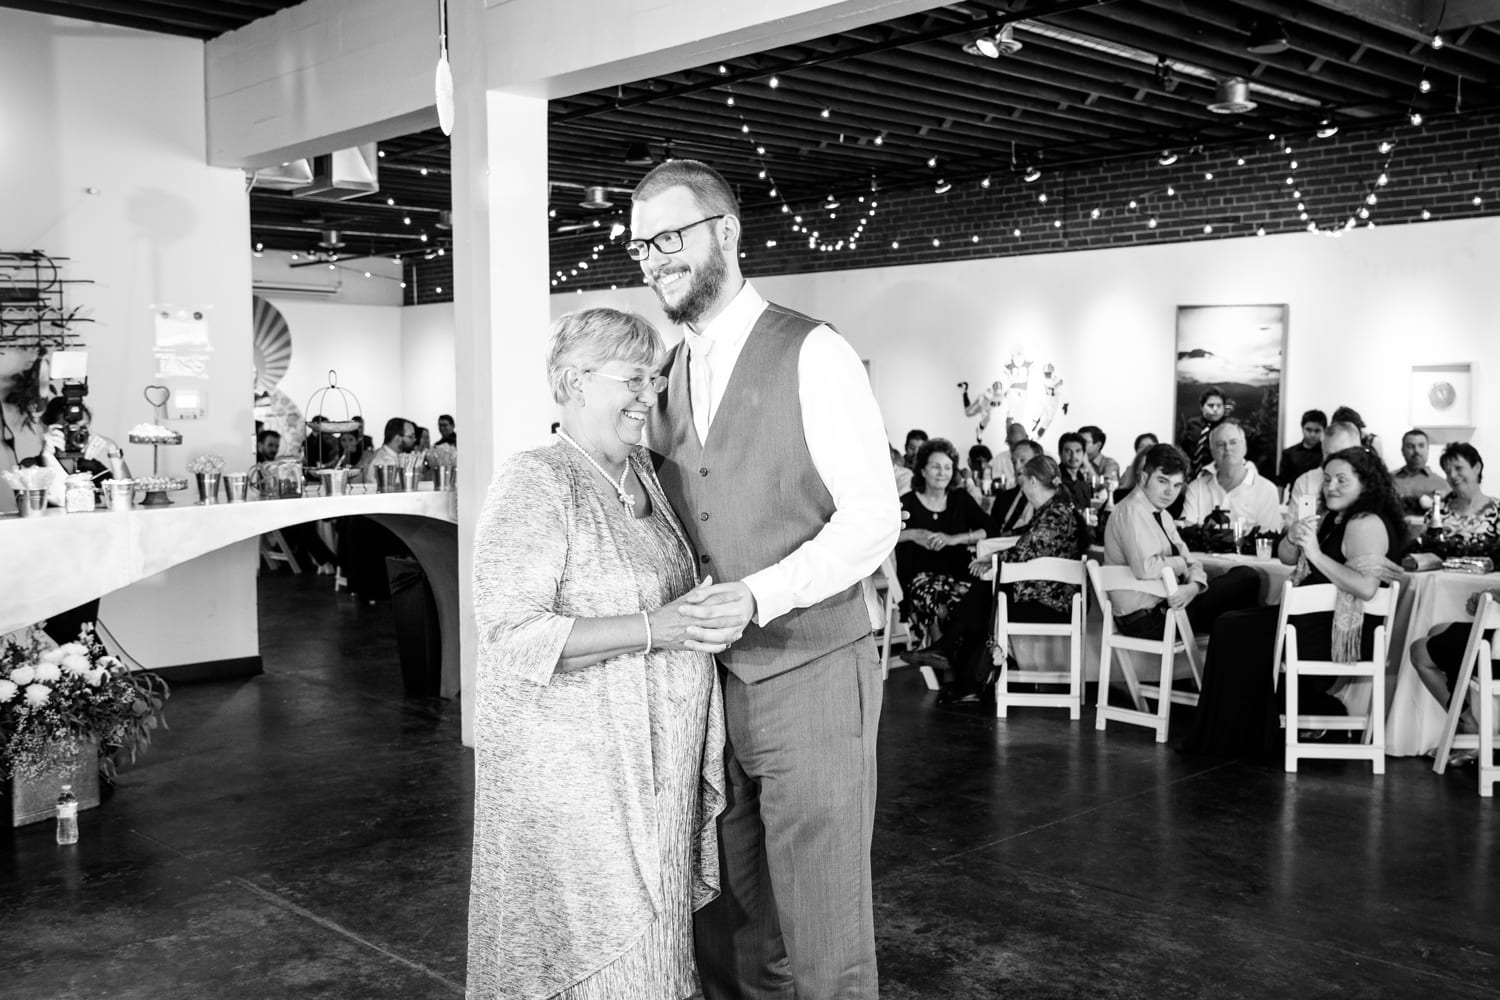 John Moore and Isabel Orozco Moore wedding at IAO Gallery in Oklahoma City // Photo by Leia Smethurst Photography